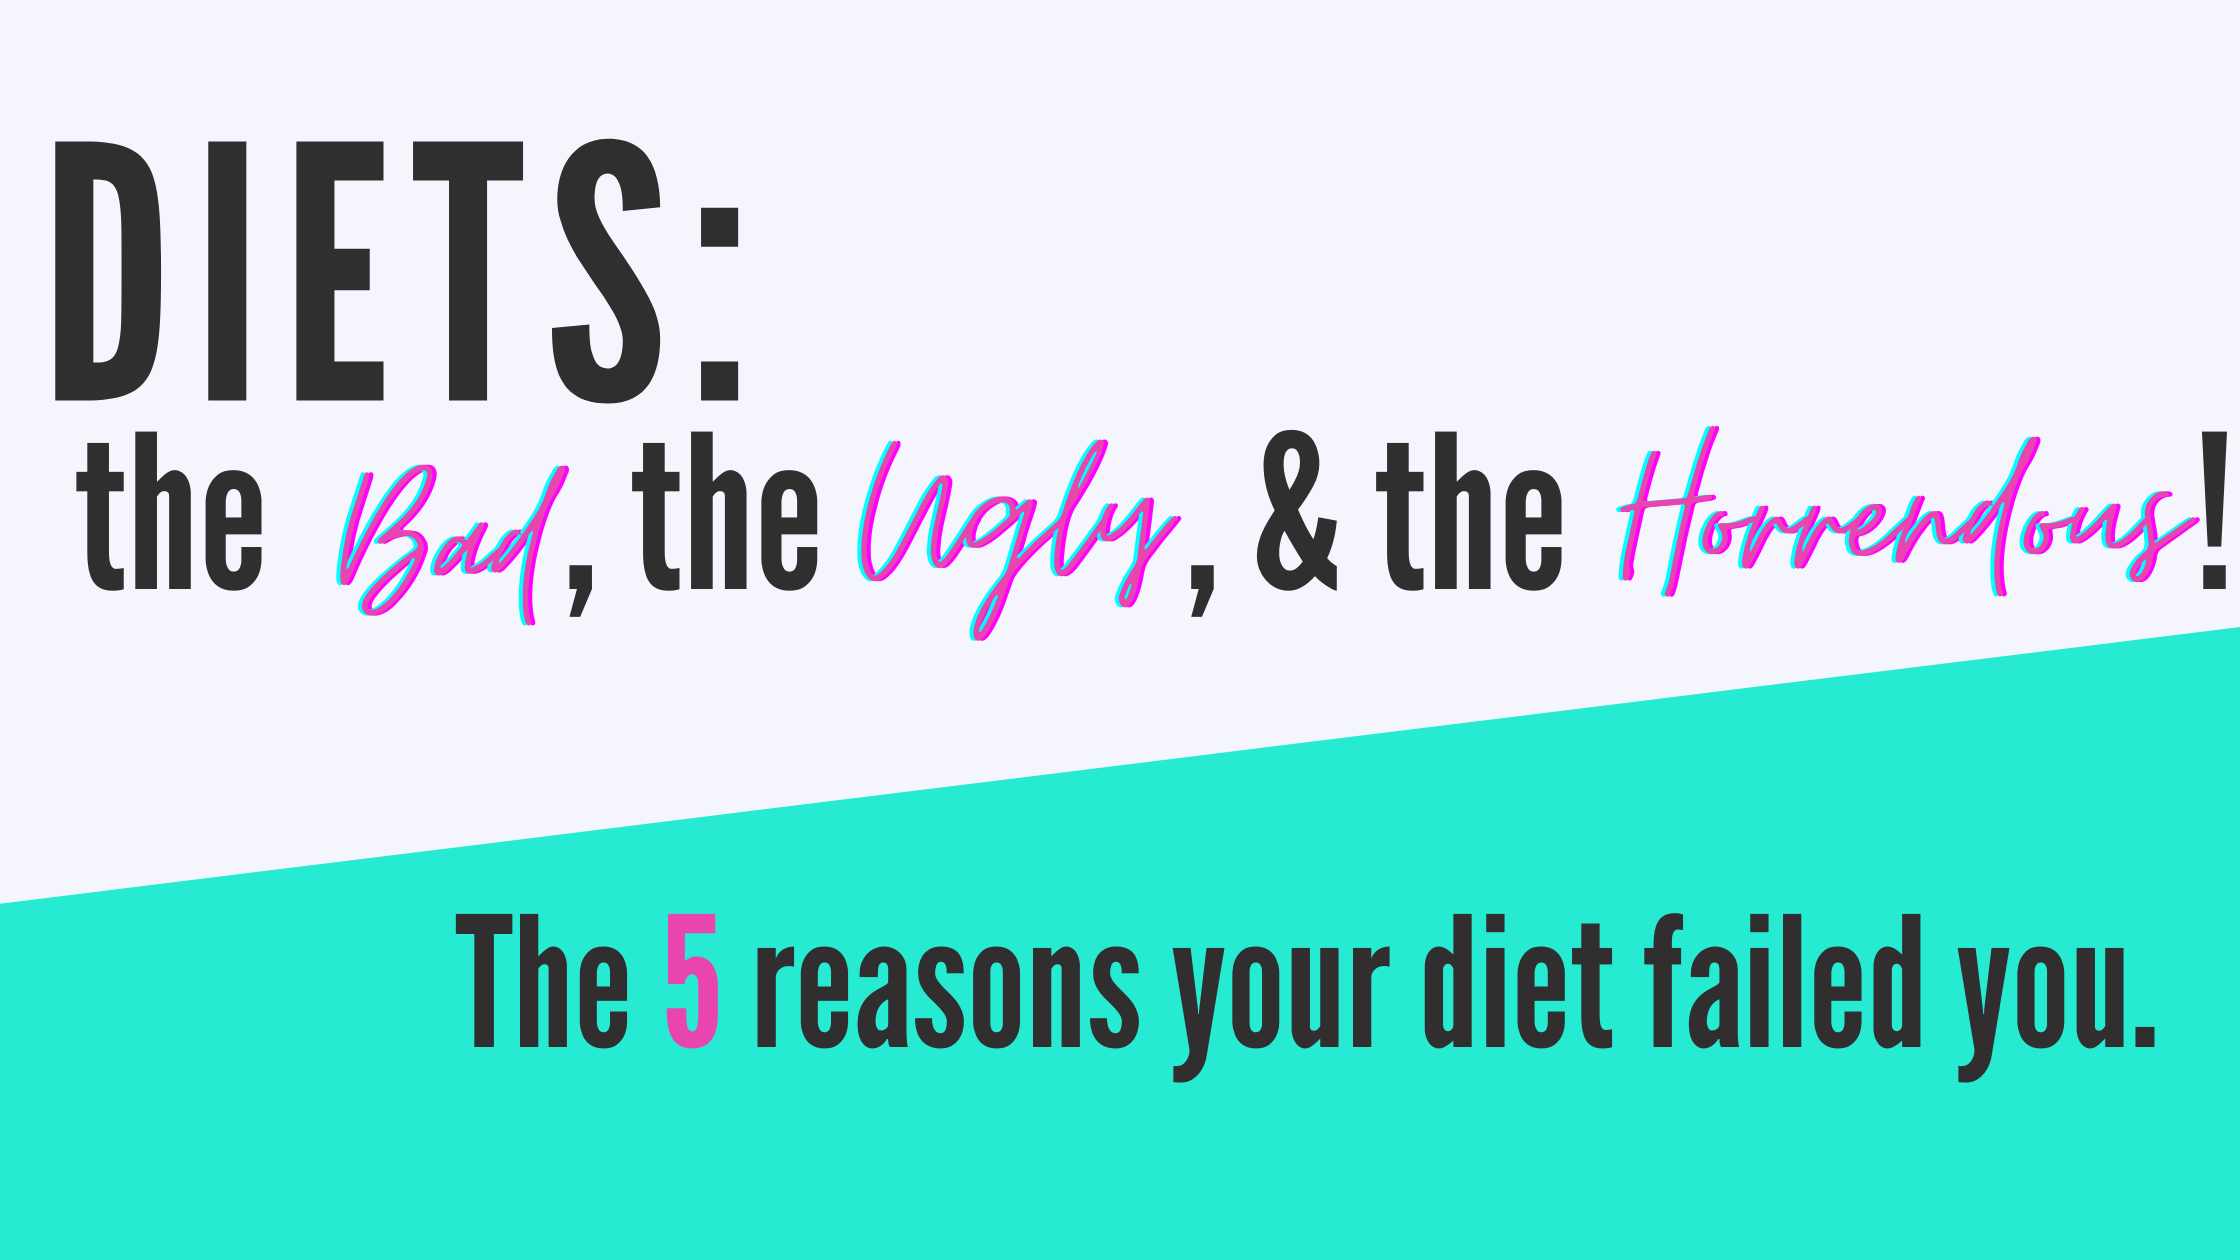 DIETS: the bad, the ugly, & the horrendous! The 5 reasons your diet failed you.